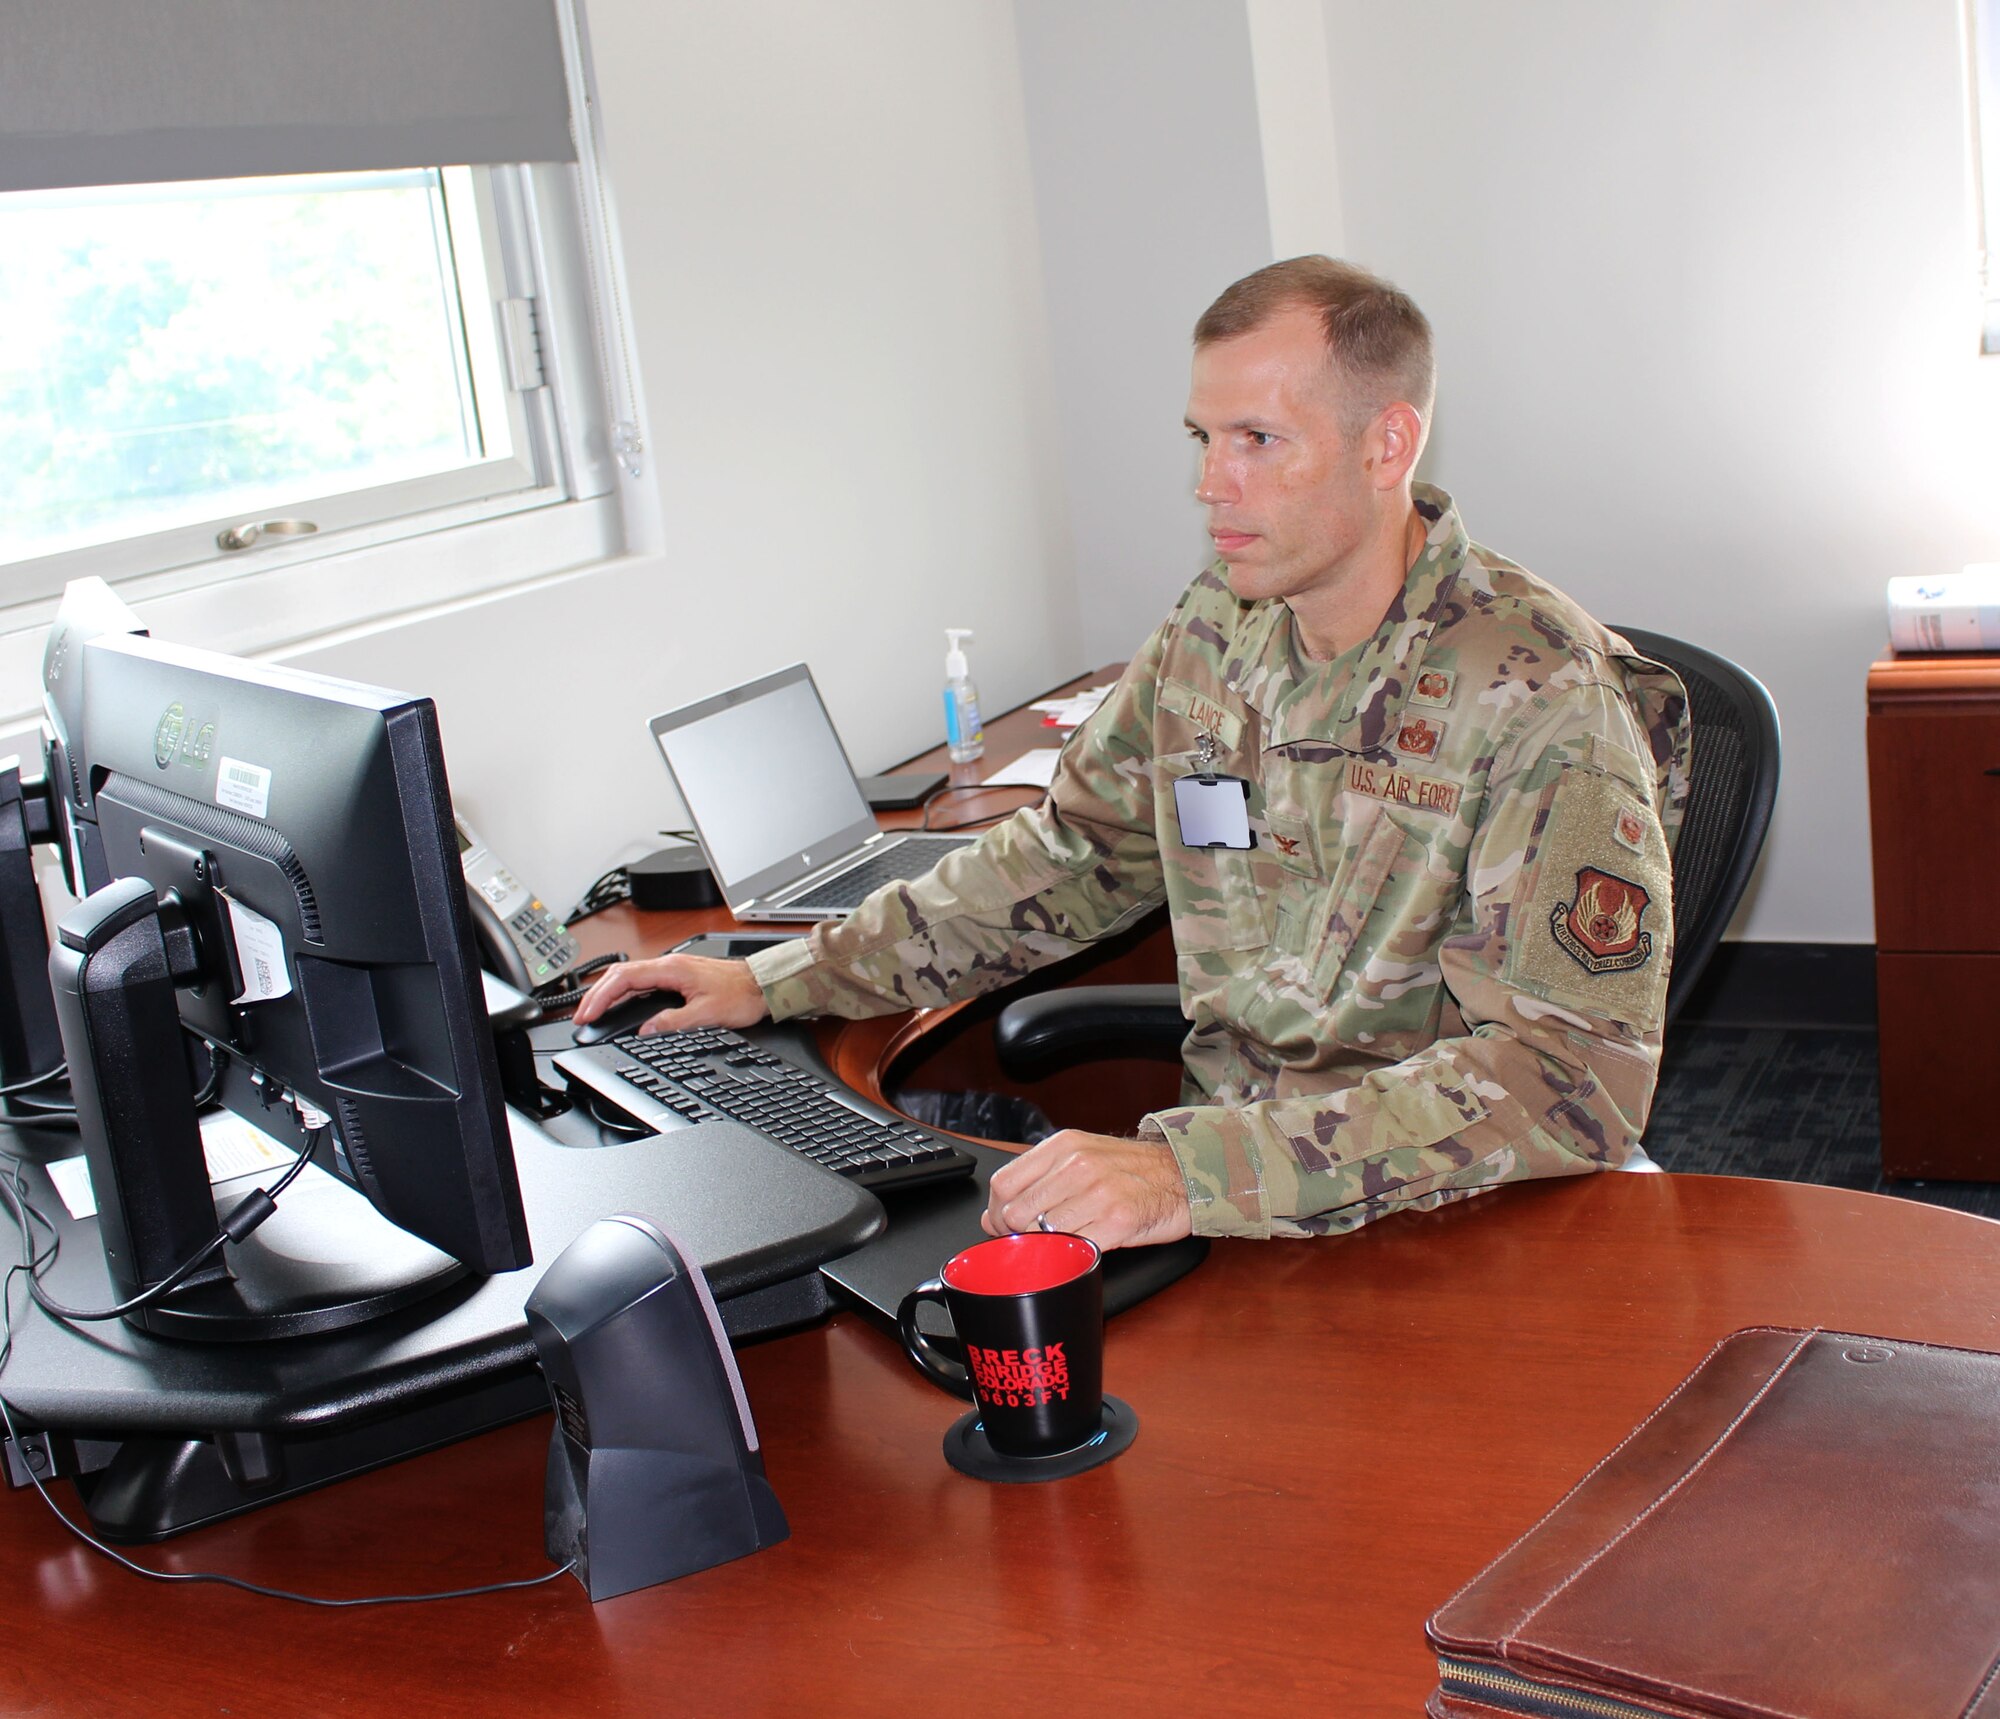 Col. Robert Lance, chief of the Arnold Engineering Development Complex Test Support Division, works in his office at Arnold Air Force Base, Tenn., Aug. 20, 2021. (U.S. Air Force photo by Deidre Moon) (This image has been altered by blurring a badge for security purposes.)